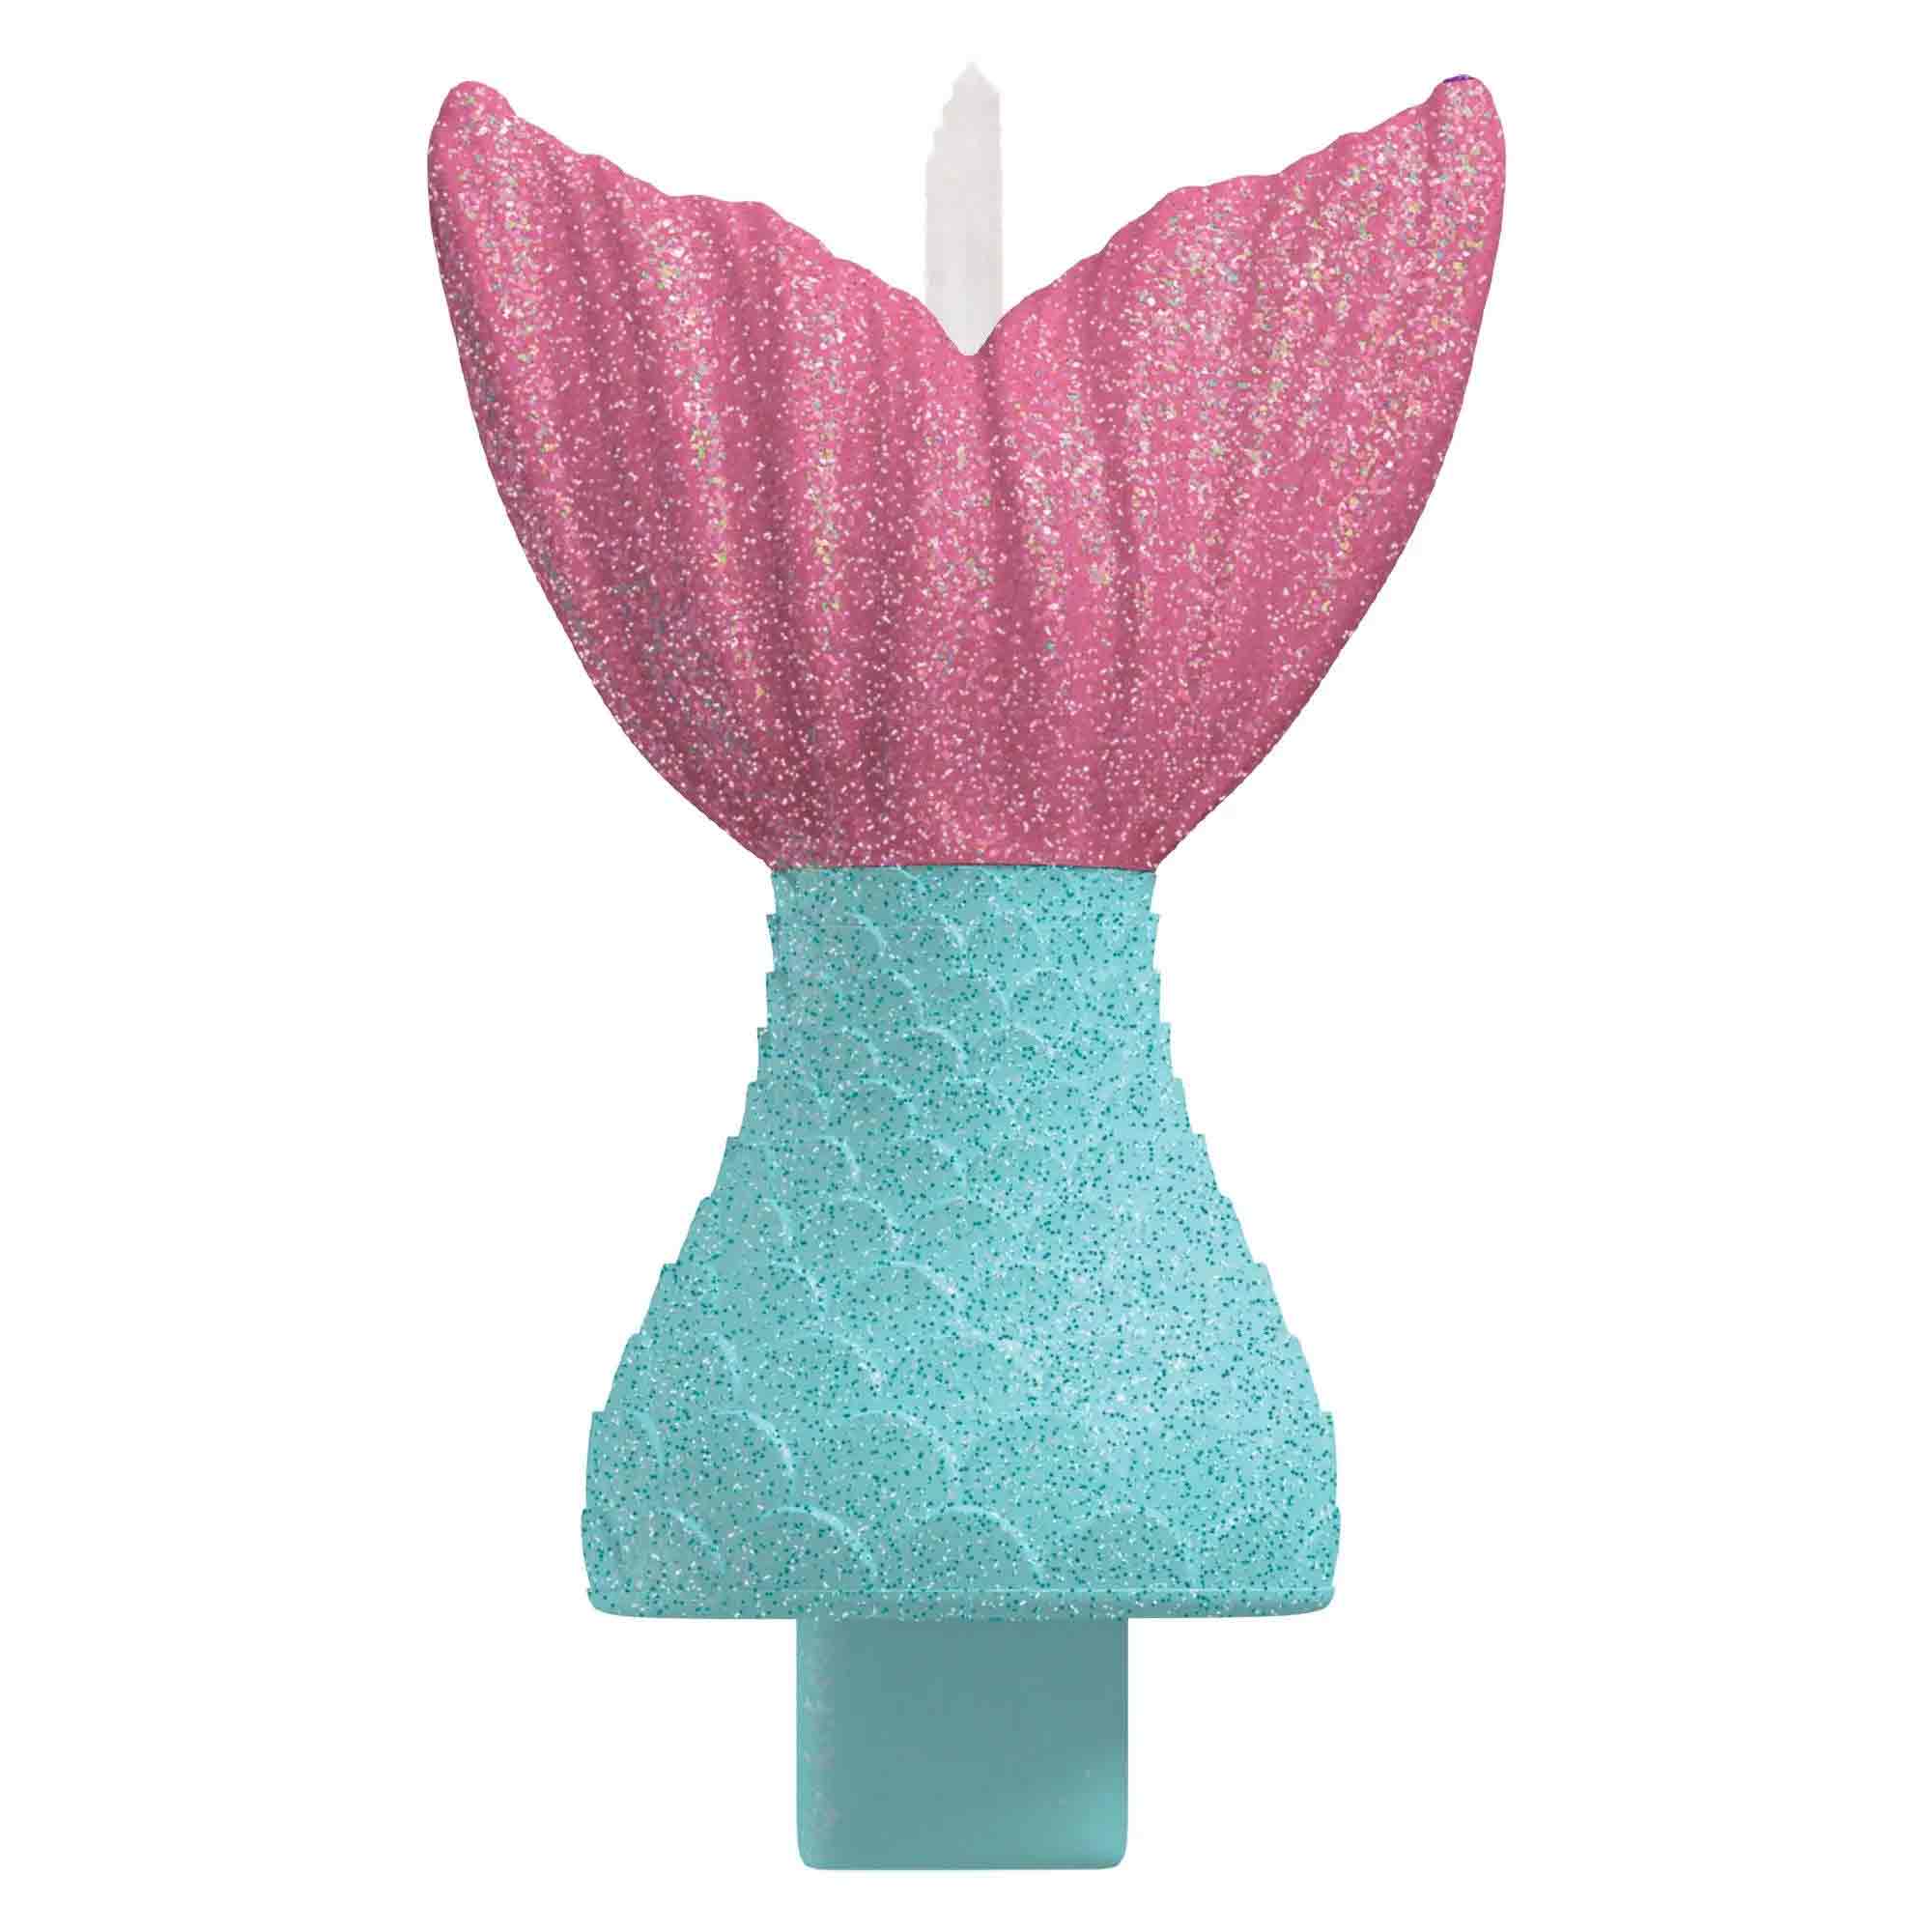 Shimmering Mermaids Tail Birthday Candle with Glitter - Party Centre